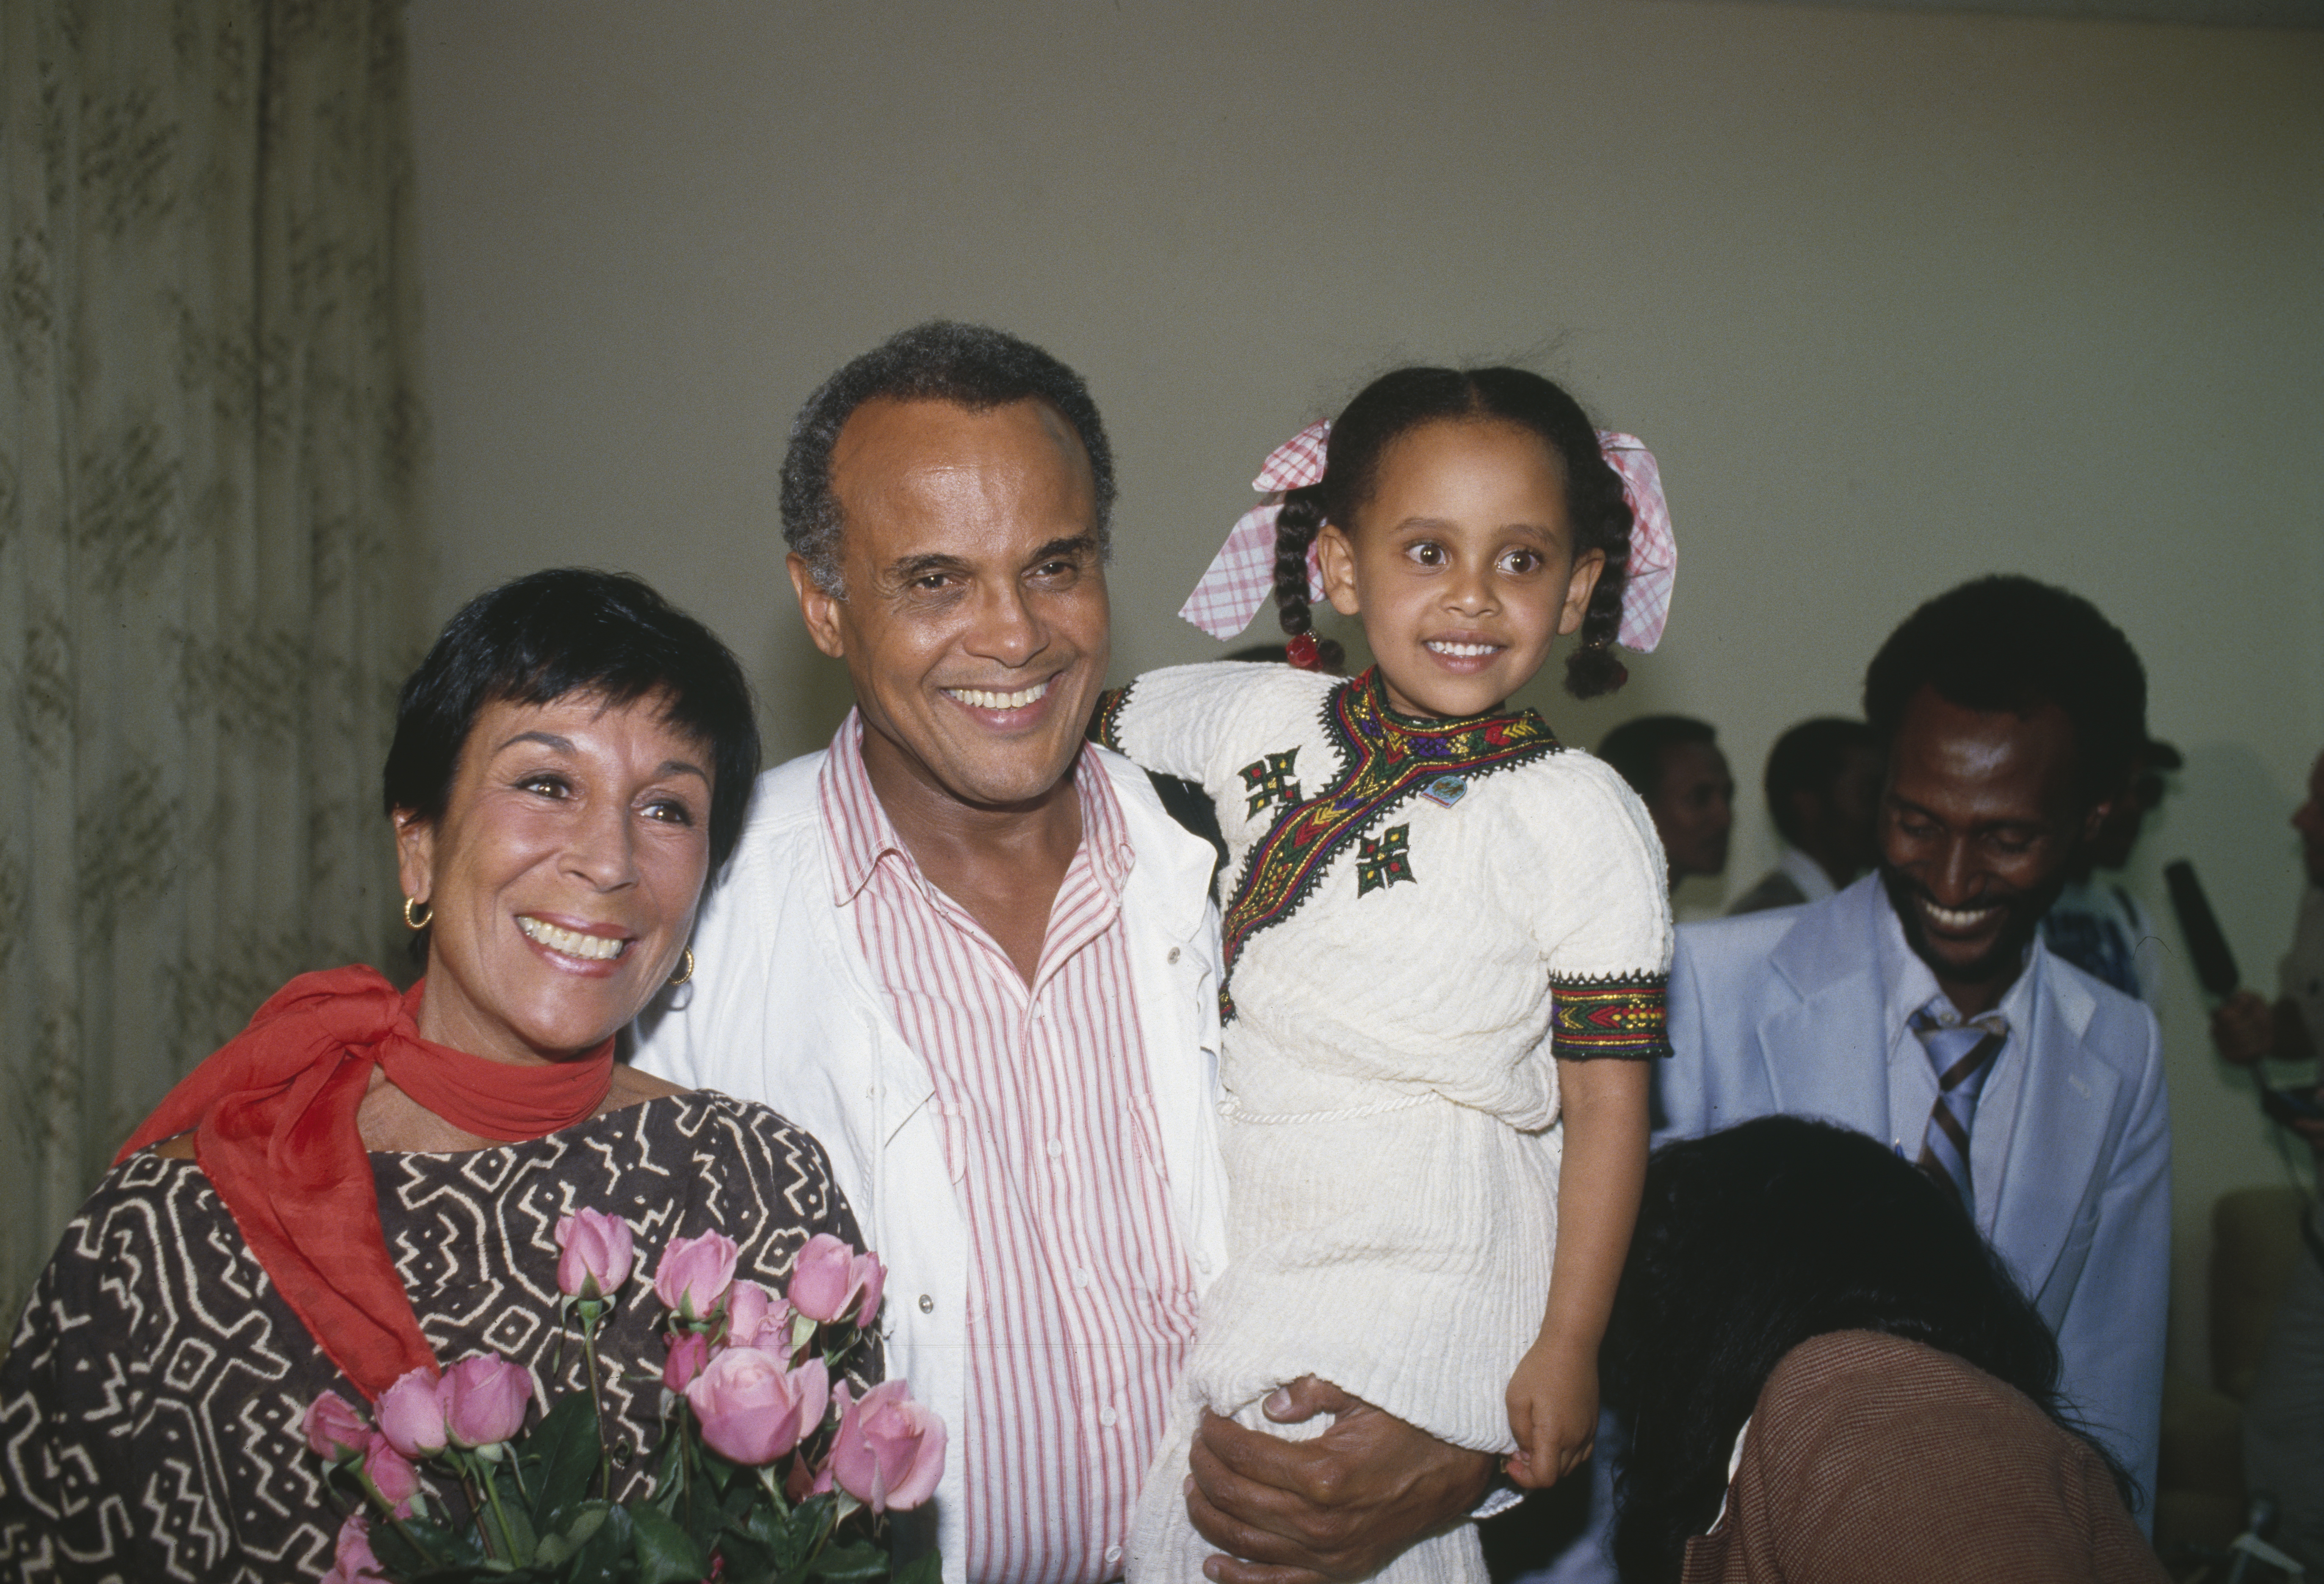 Julie Robinson and Harry Belafonte in Addis Abeba, circa 1985. | Source: Getty Images